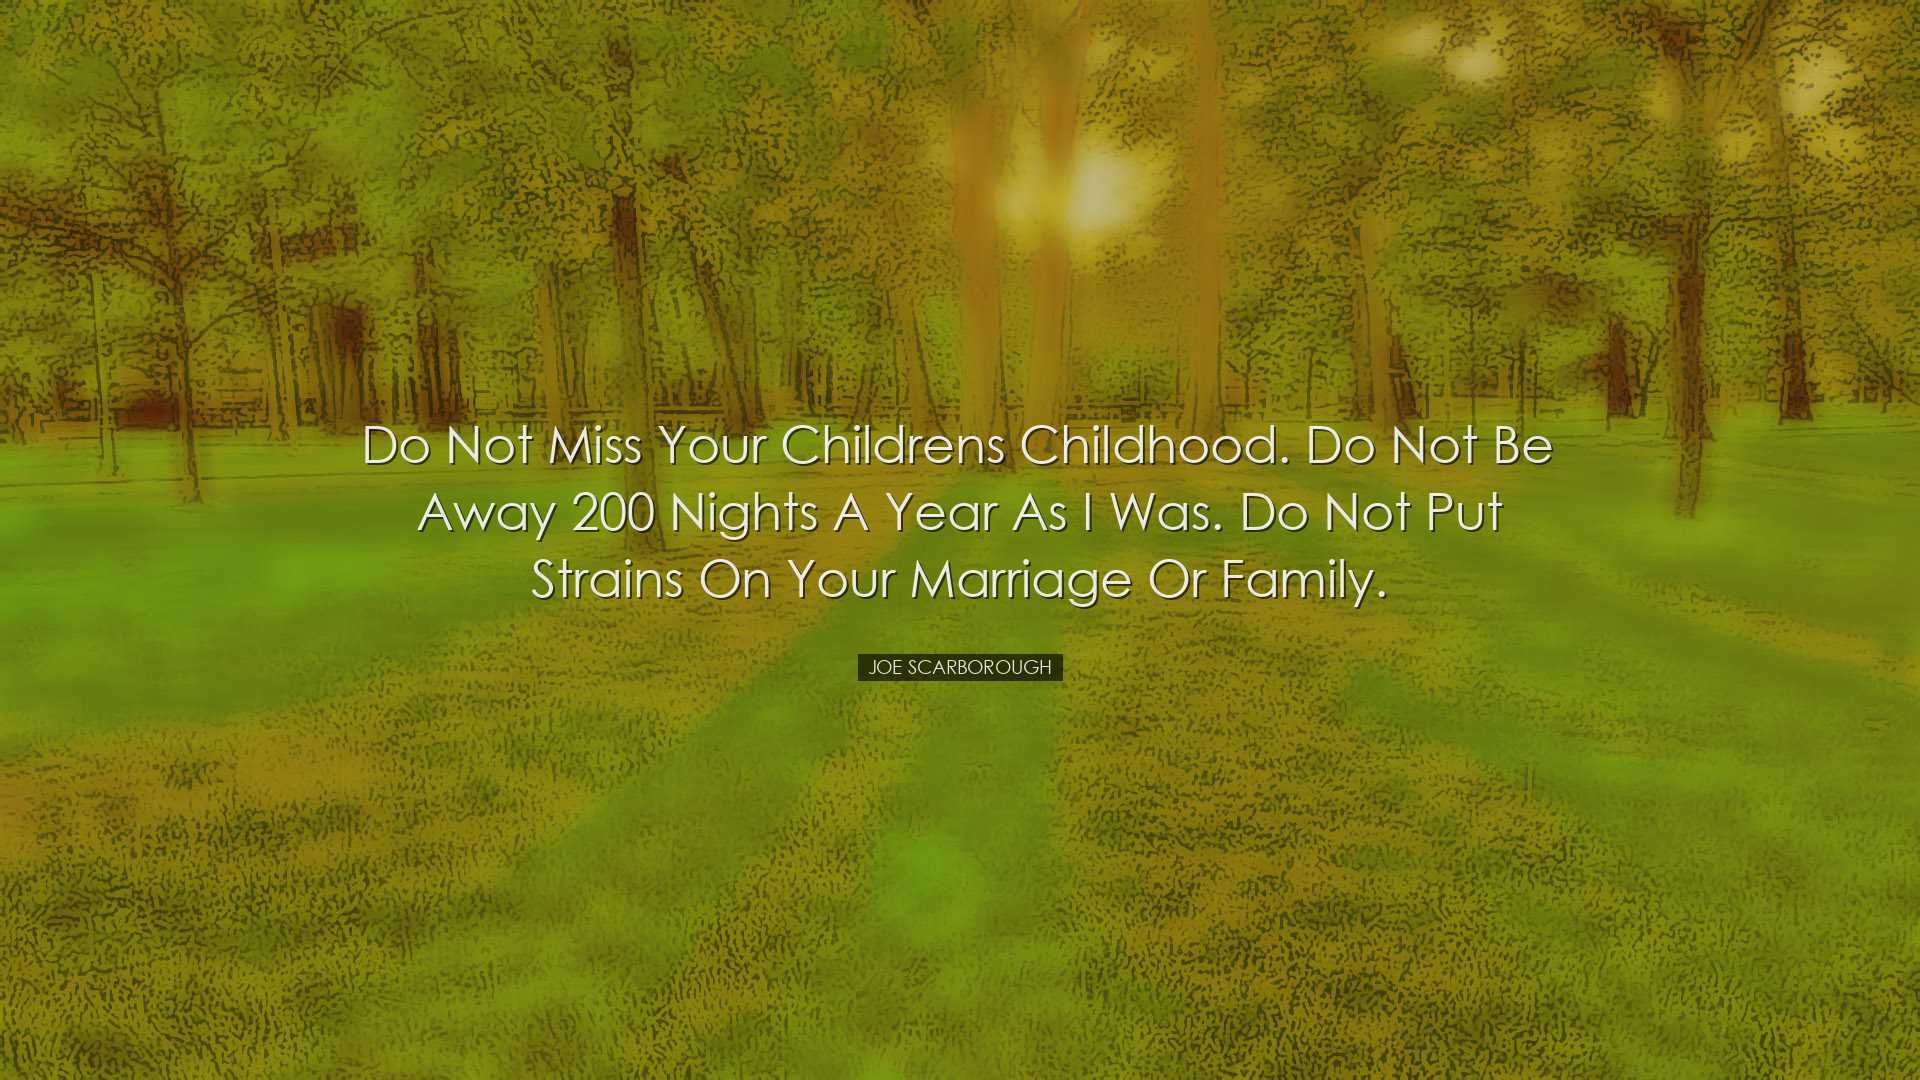 Do not miss your childrens childhood. Do not be away 200 nights a